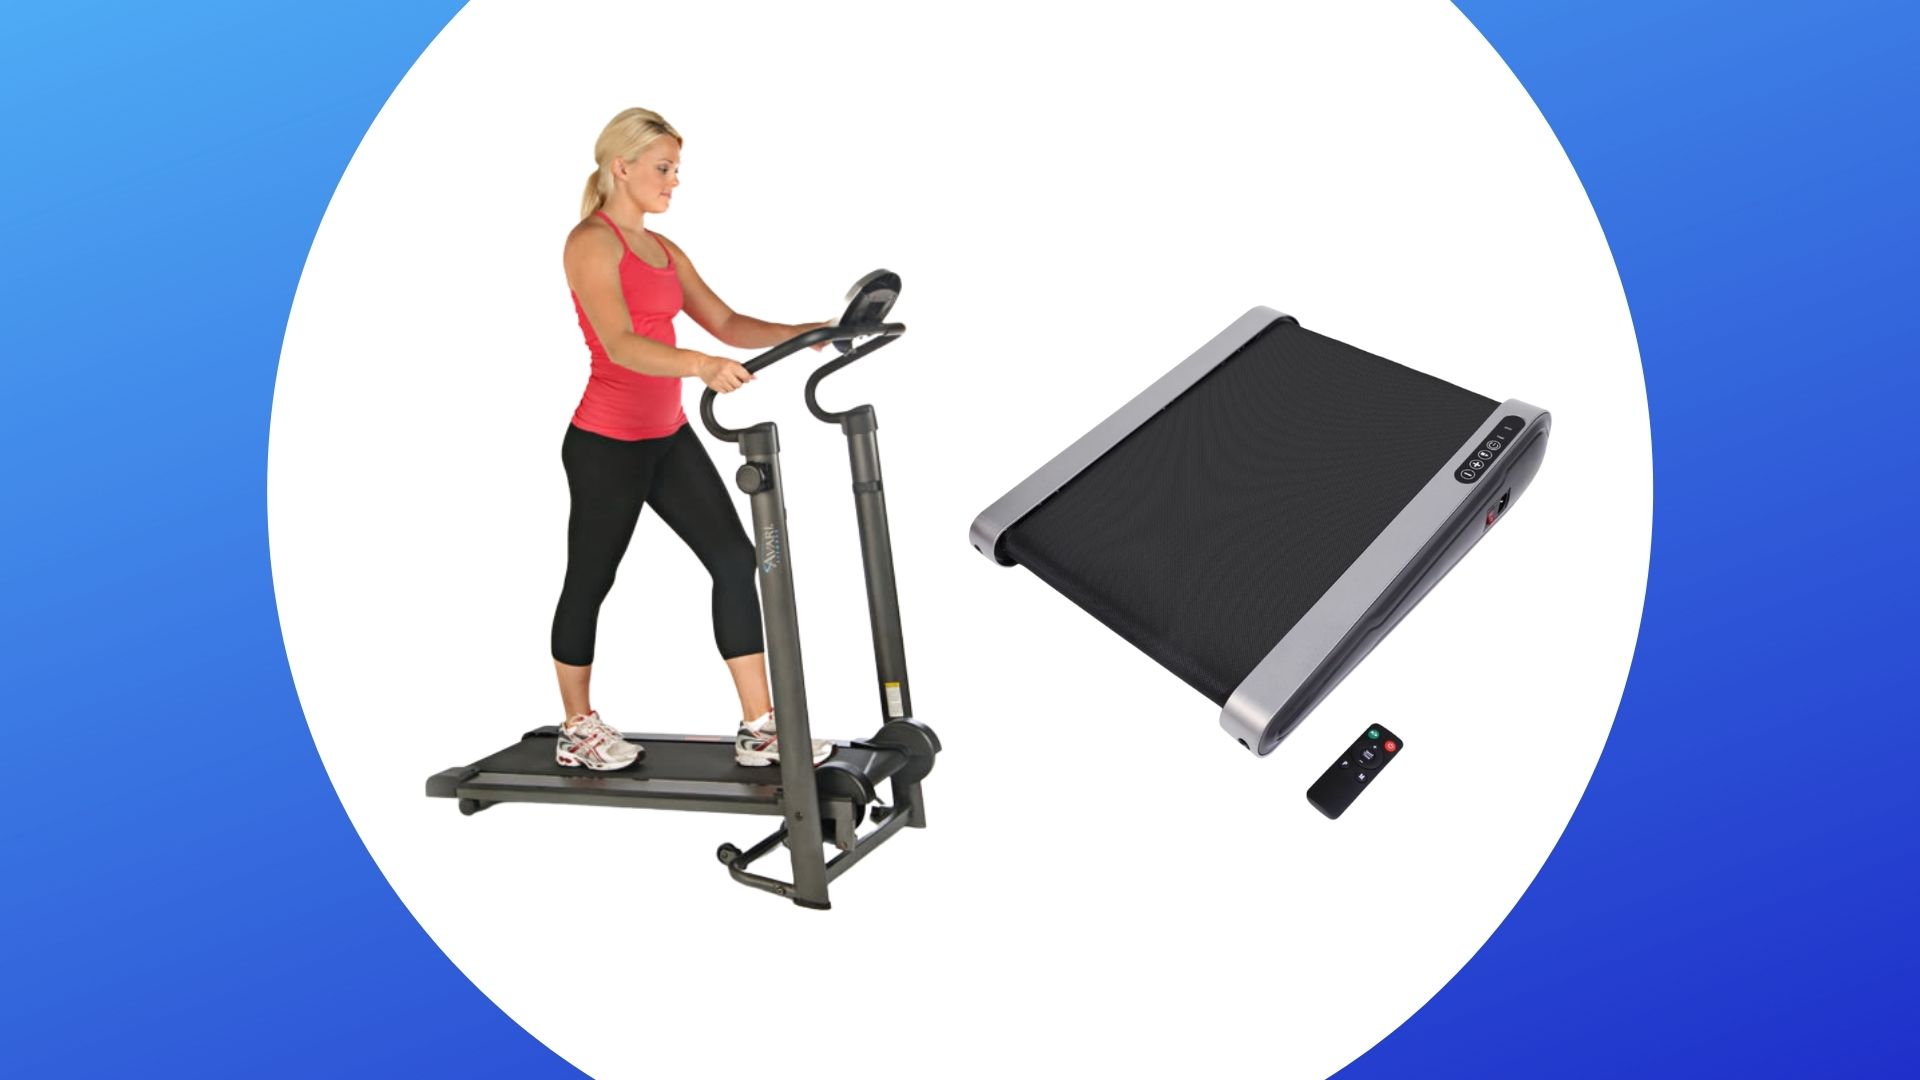 Easy Assembly fannay Treadmills for Home Use Heavy Duty Steel Frame Walking Running Motorized Exercise Machine for Small Spaces Folding Electric Compact Under Desk Treadmill for Women Men 